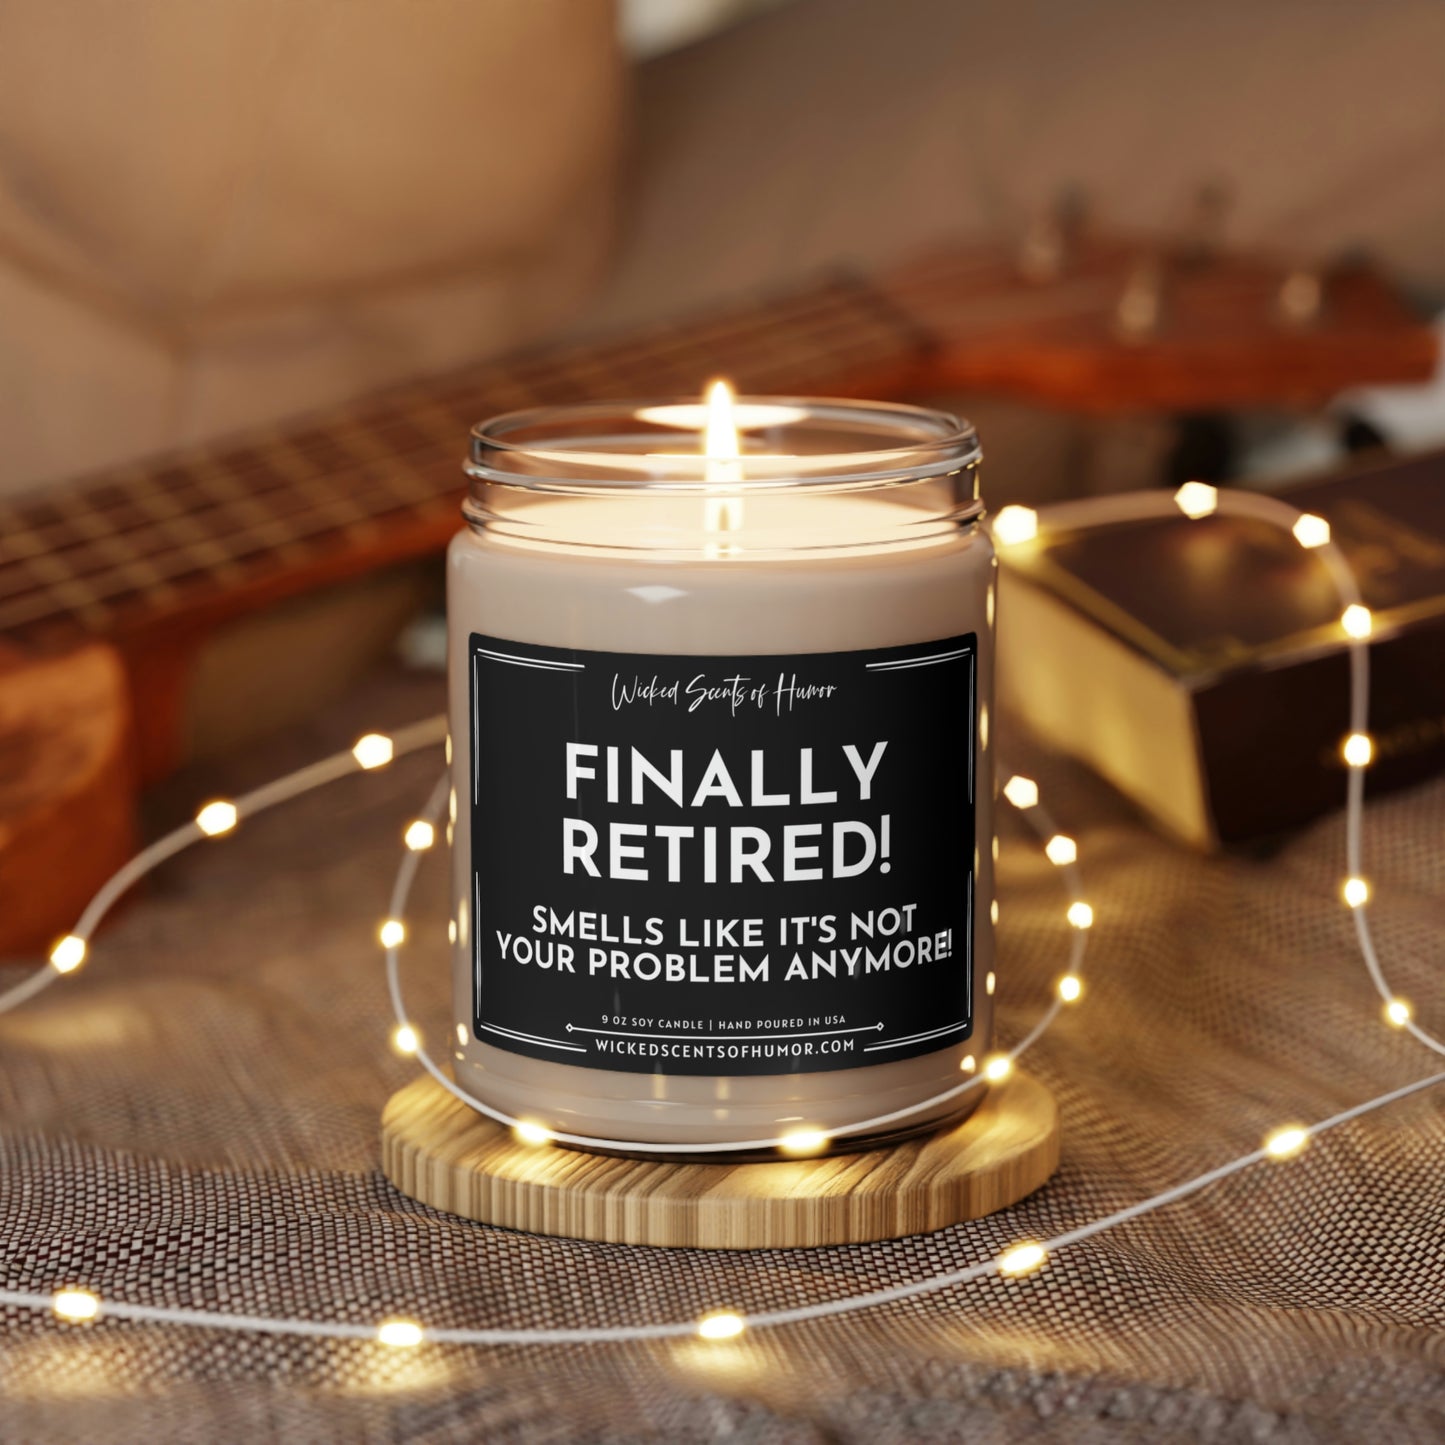 Happy Retirement Candle, Friendship Candle, Retirement Gifts, Retirement Party Gifts, Personalized, Funny Retirement Gift, 9oz Soy Candle